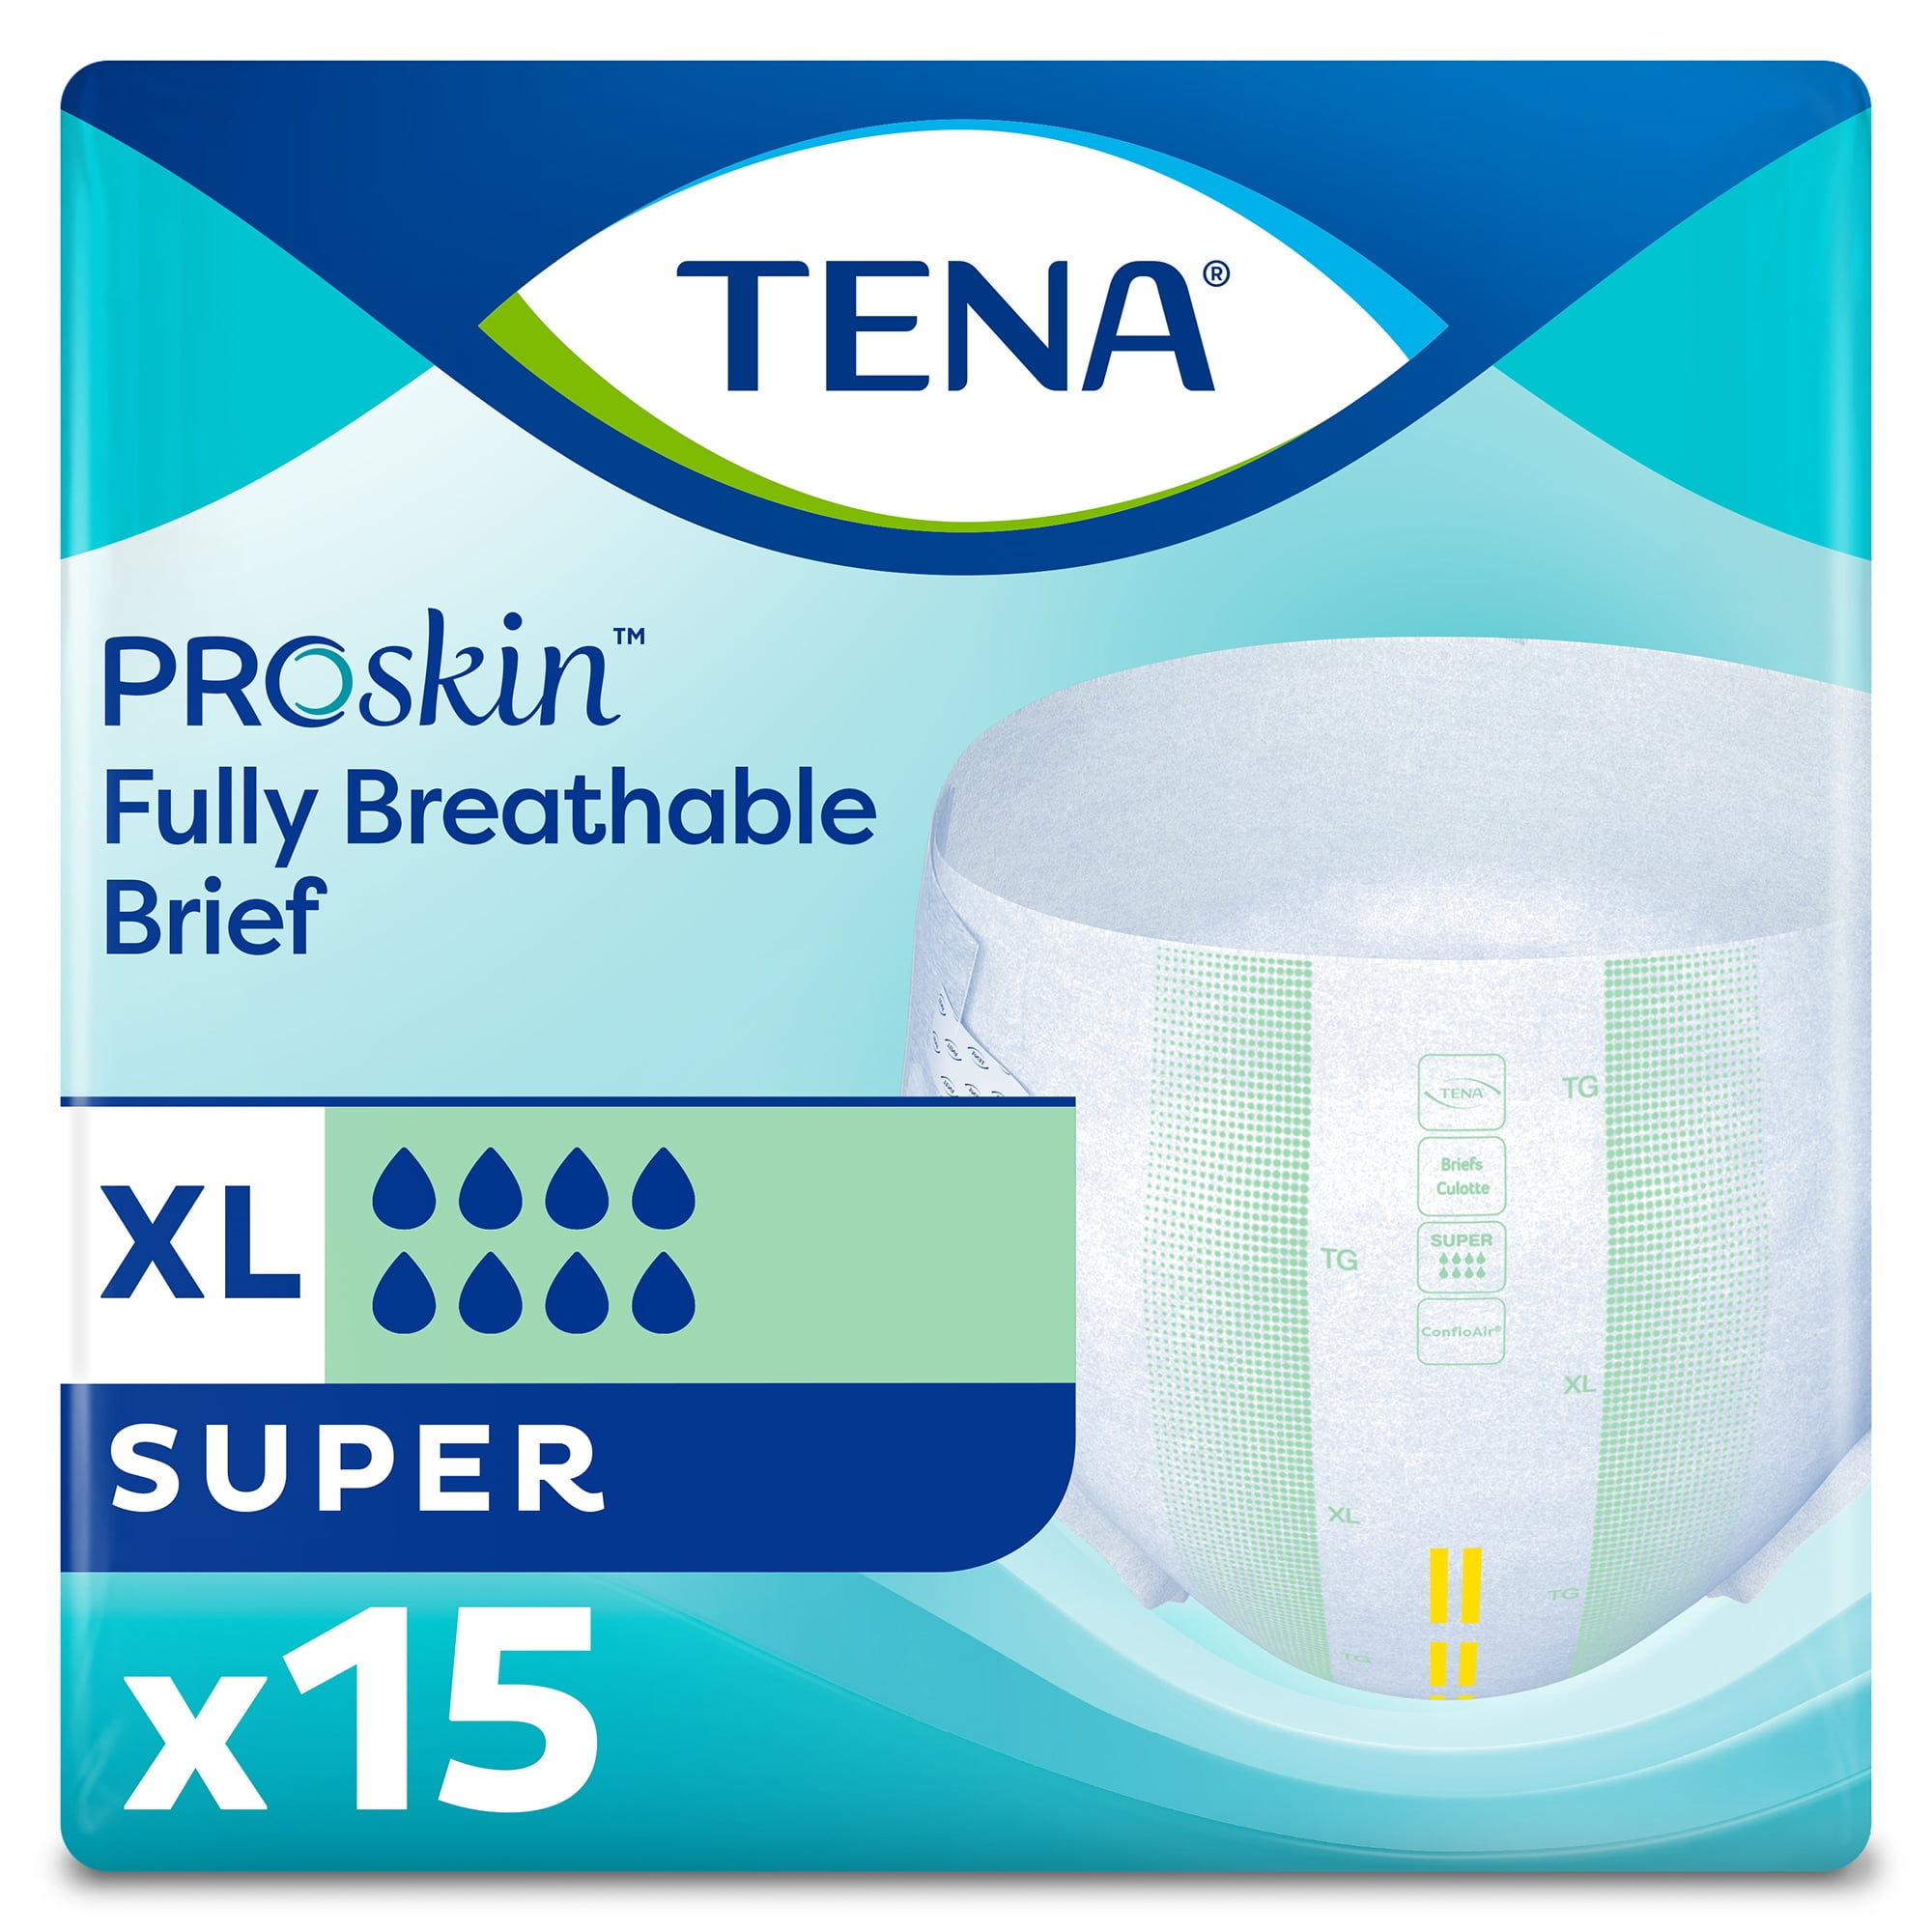 TENA ProSkin Super Adult Incontinence Brief XL Heavy Absorbency